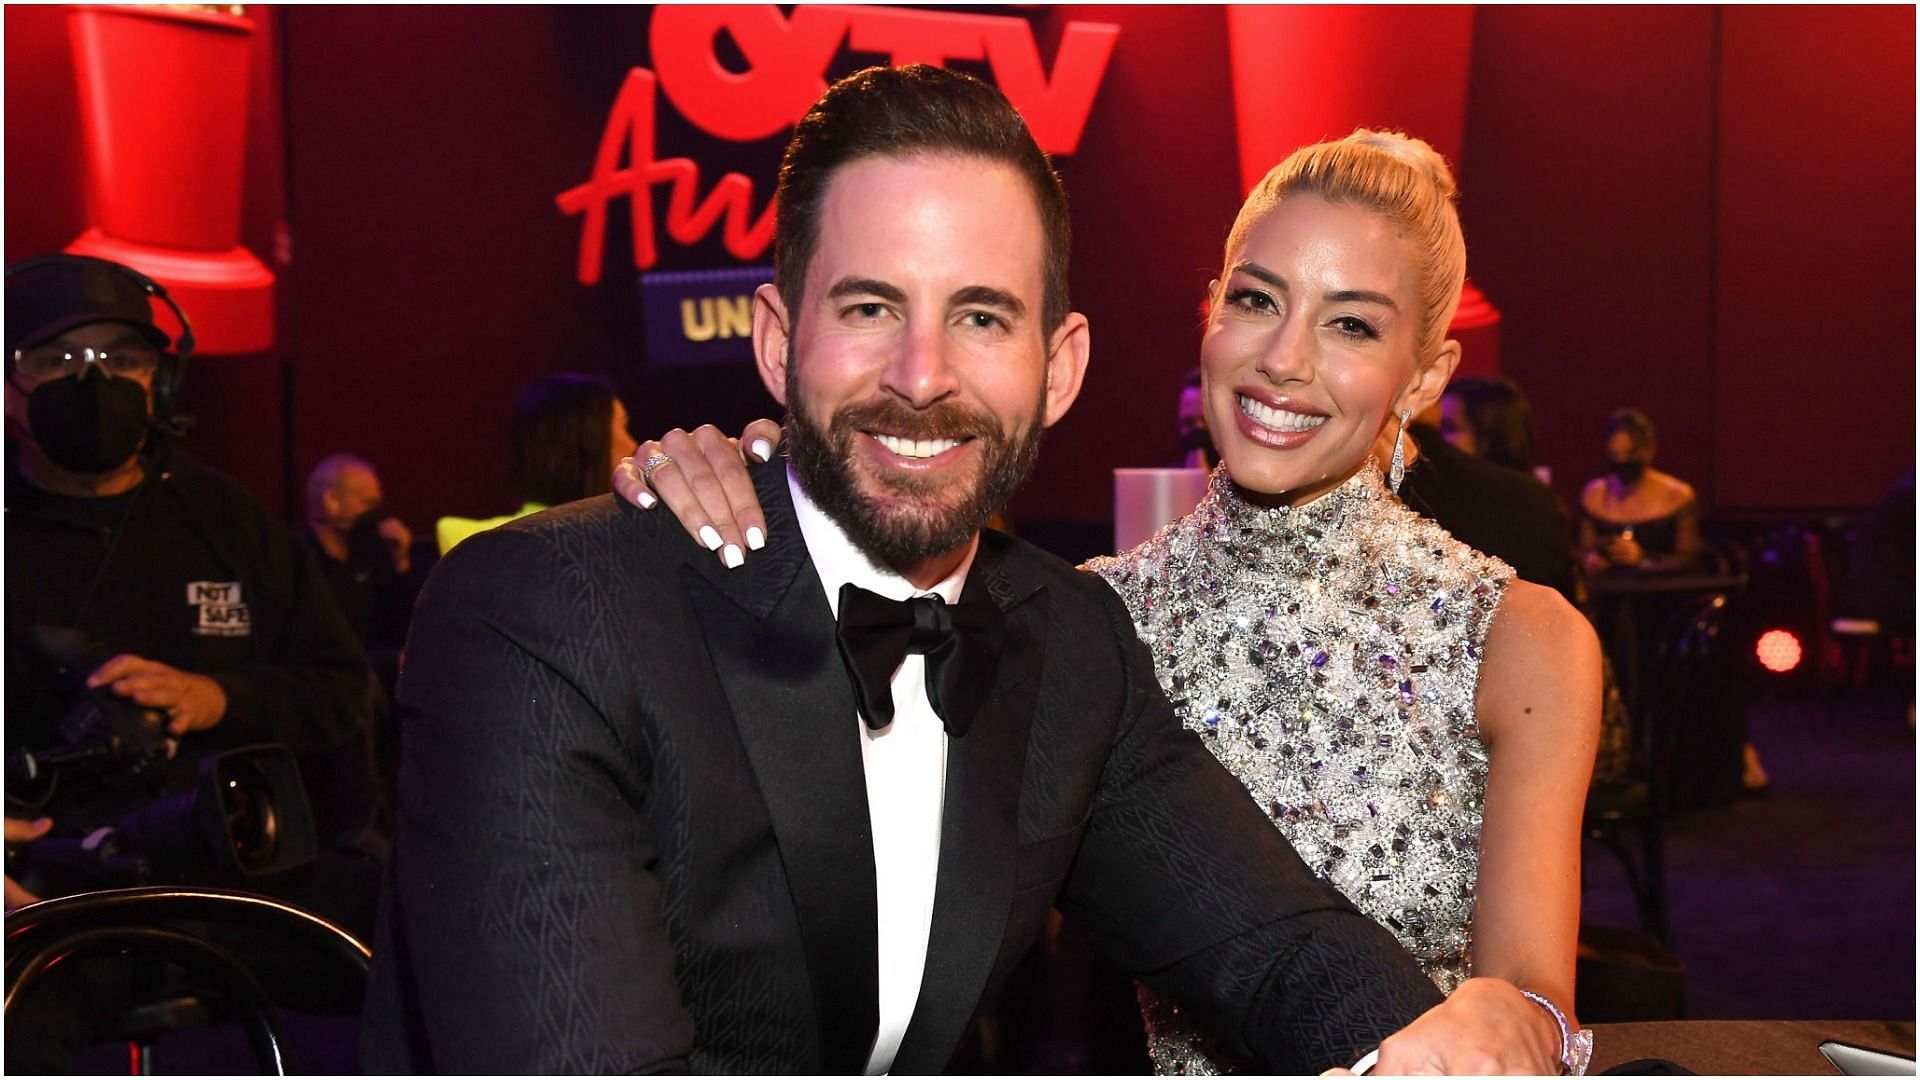 Tarek El Moussa and Heather Rae Young attend the 2021 MTV Movie &amp; TV Awards: UNSCRIPTED in Los Angeles (Image via Getty Images)